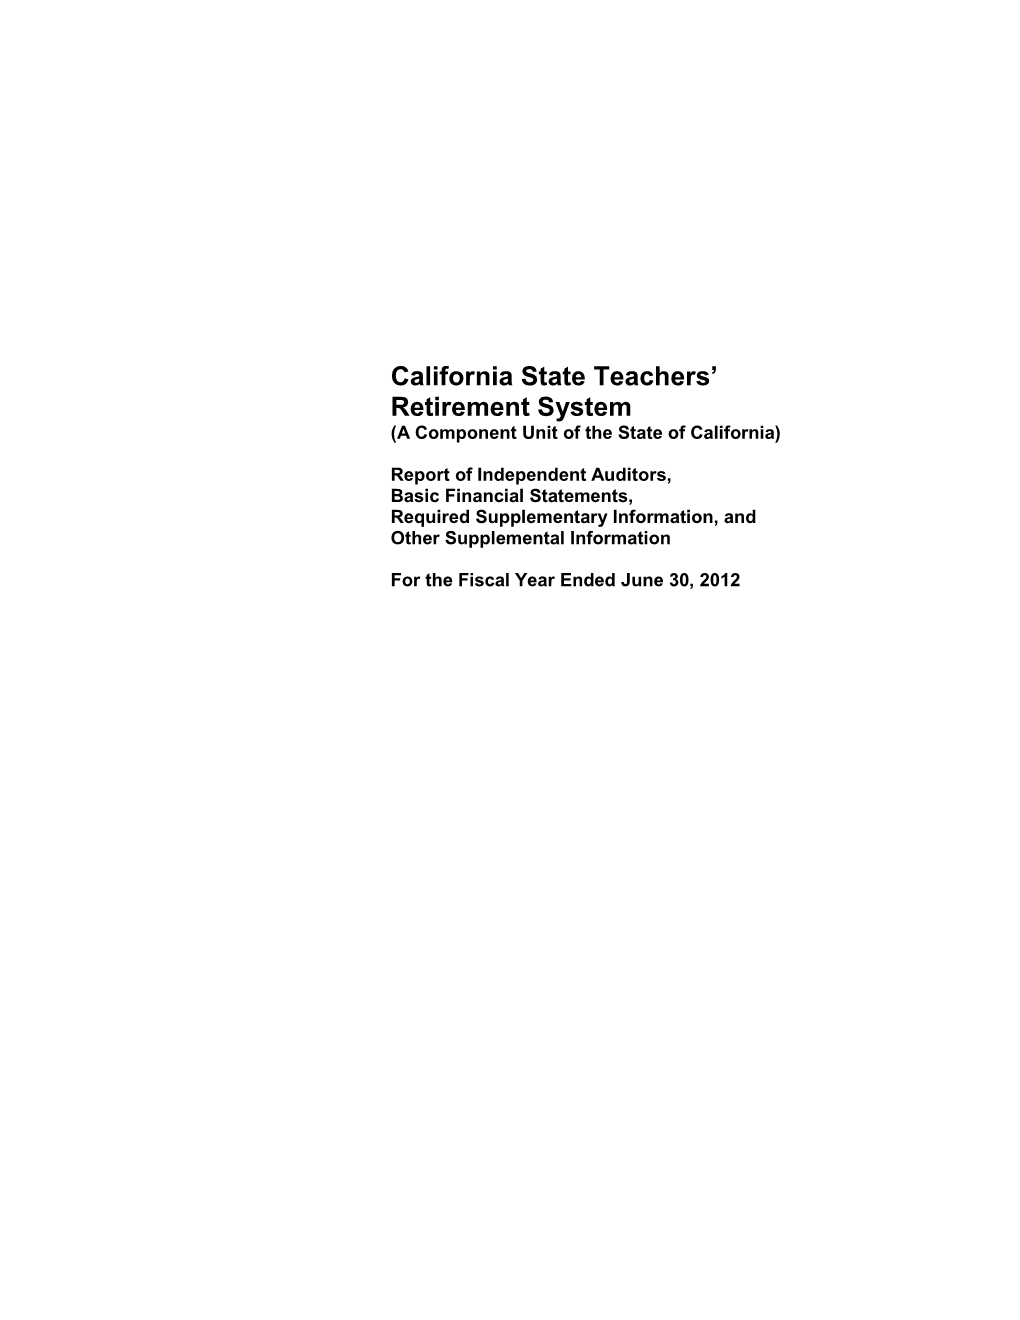 California State Teachers' Retirement System Management’S Discussion and Analysis (Unaudited) June 30, 2012